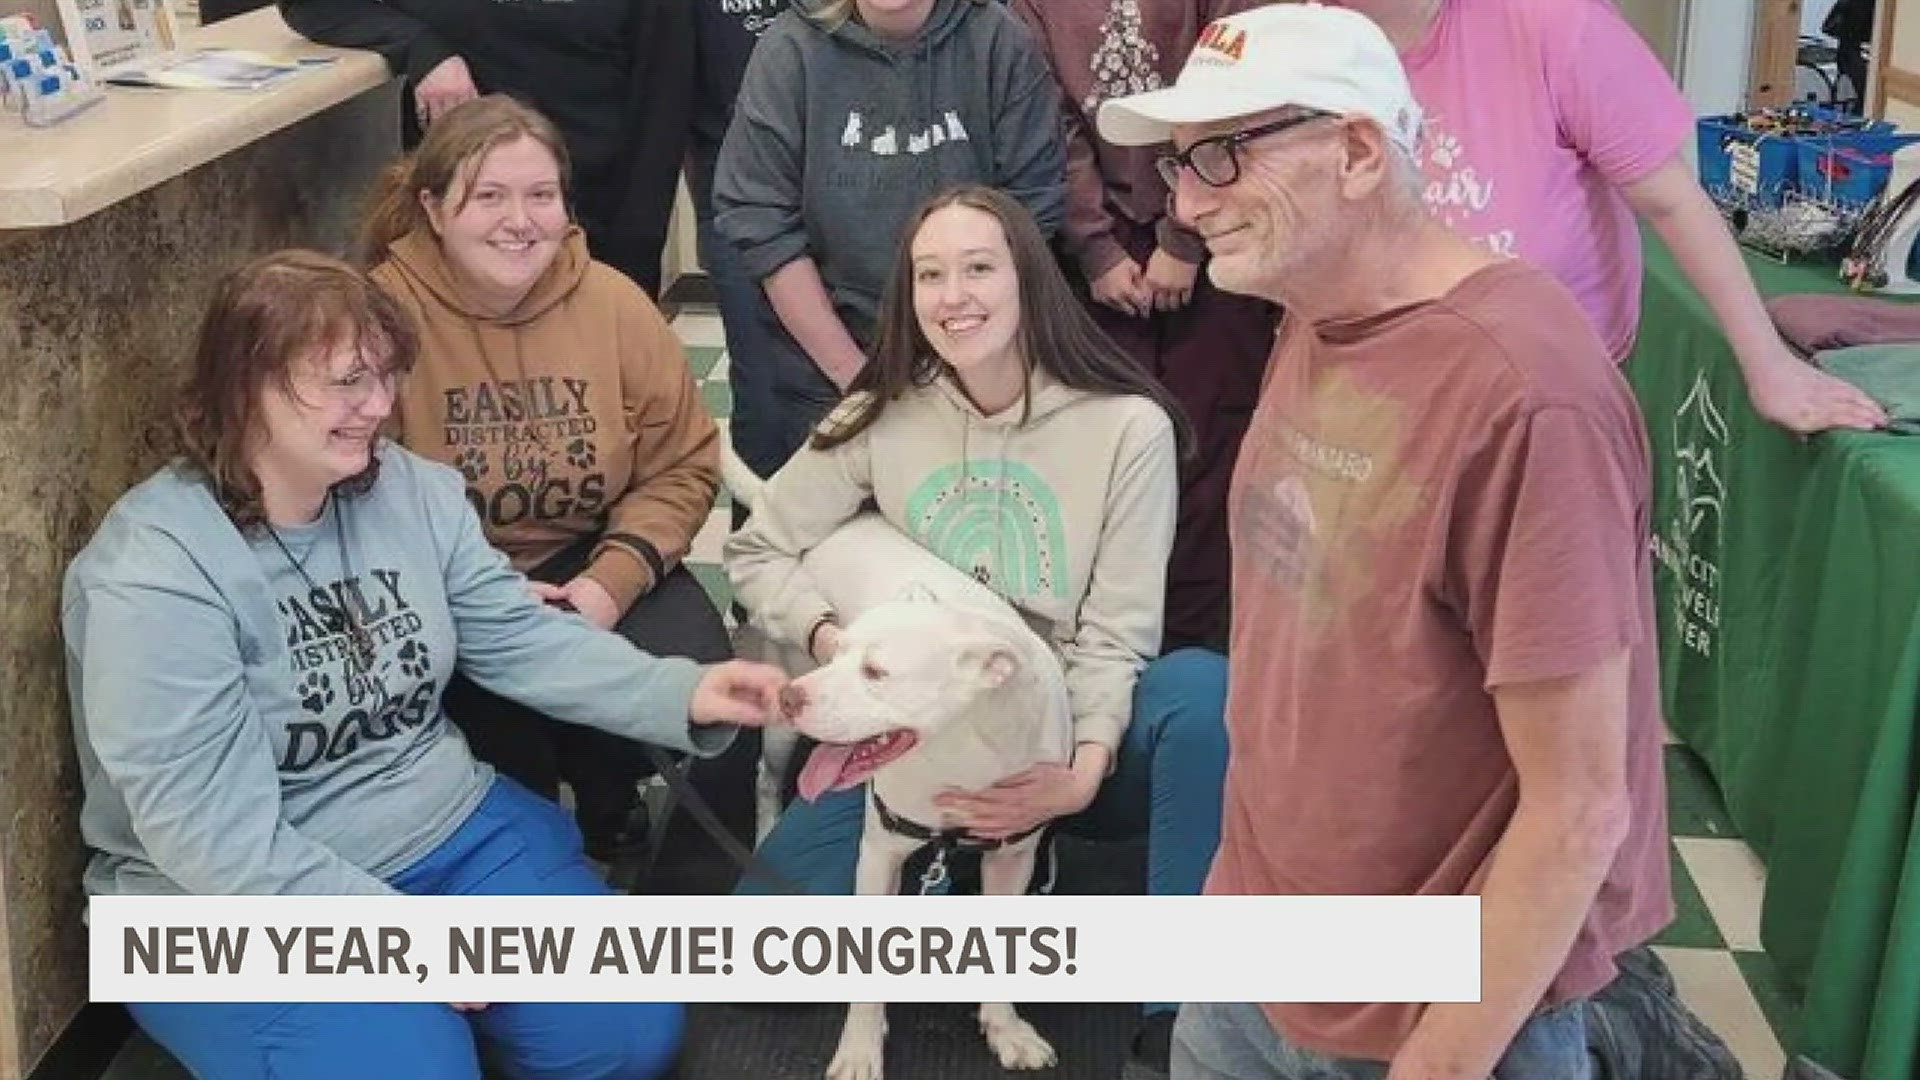 News 8 viewers were first introduced to Avie back in November, when our reporter Cesar Sanchez profiled the pup waiting for his furrever home.